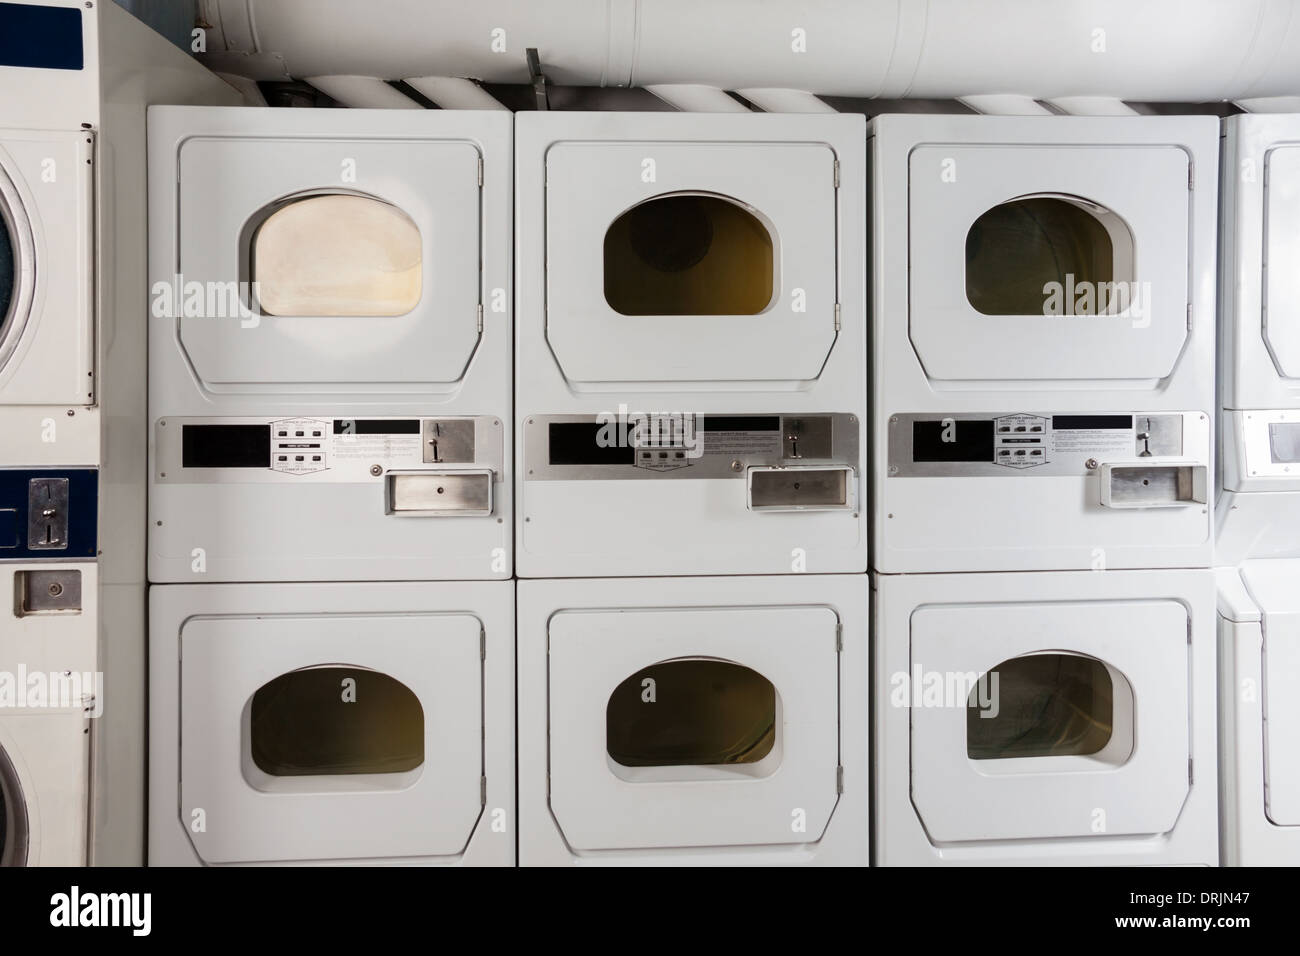 Coin Operated Laundry Machines Stock Photo